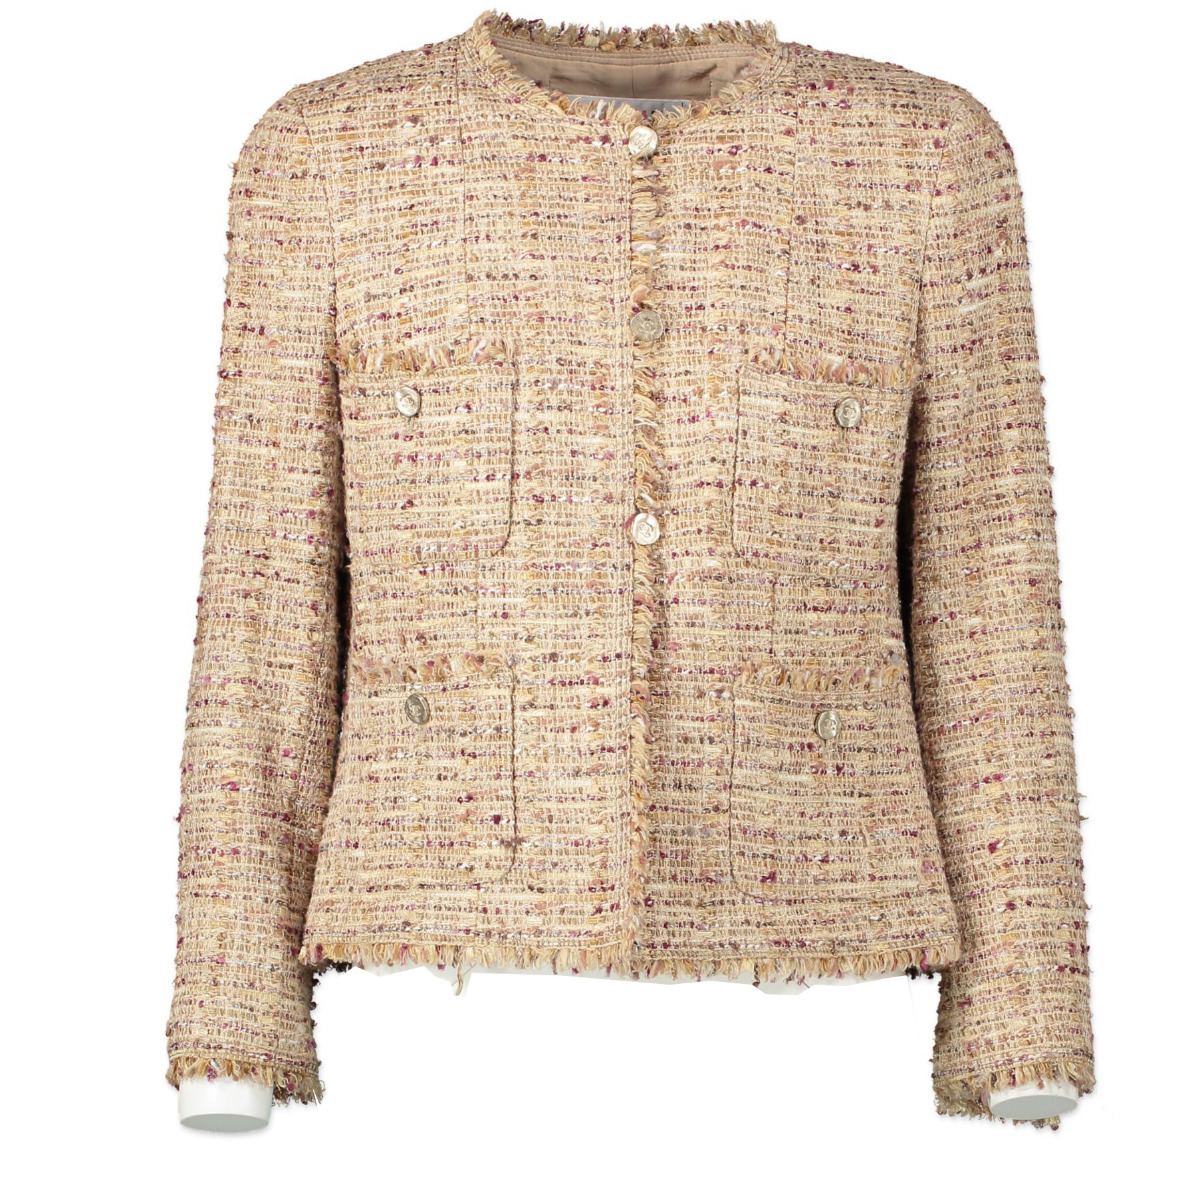 31 Seriously Chic Tweed Pieces That Remind Me of Chanel  Who What Wear